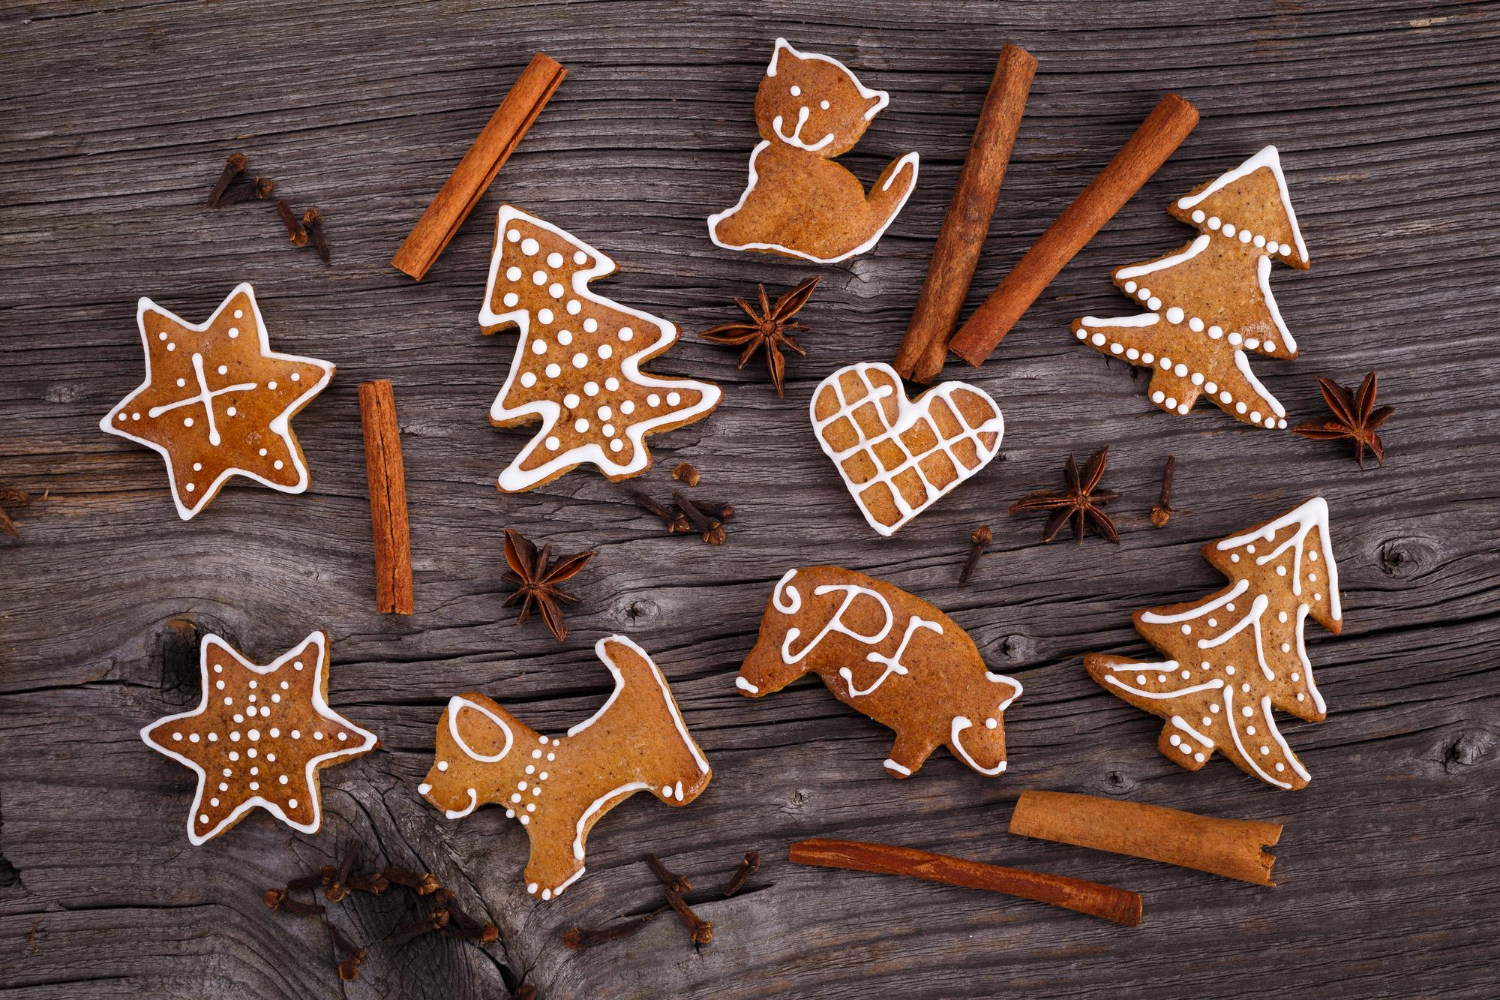 Our recipes will help you whip up the healthiest cinnamon treats for dogs!